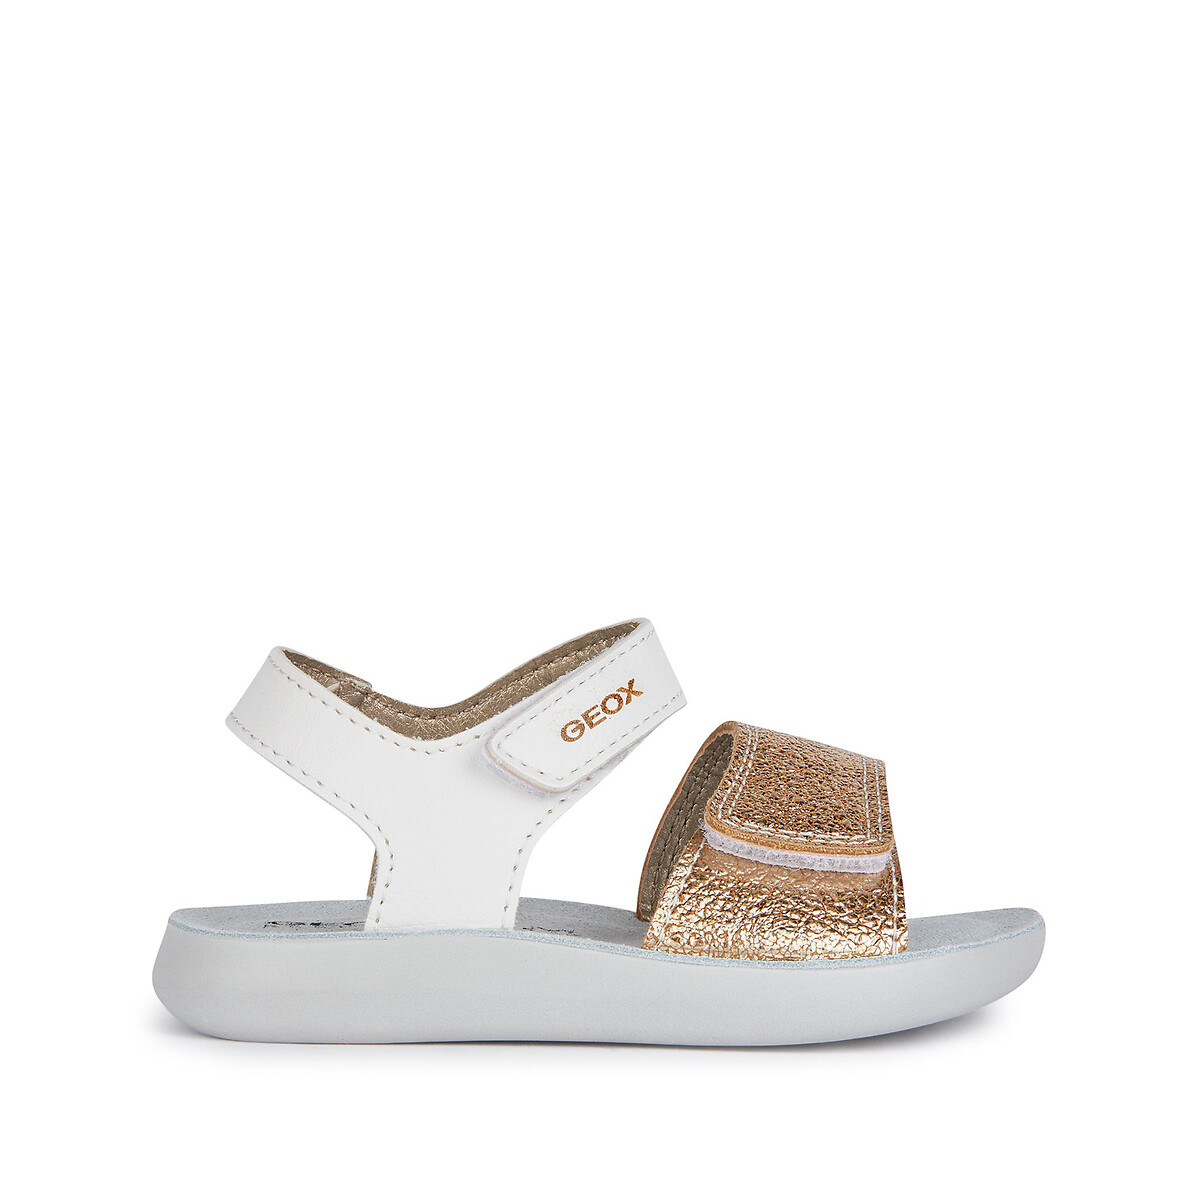 Image of Kids Lightfloppy Soft Sandals with Touch 'n' Close Fastening